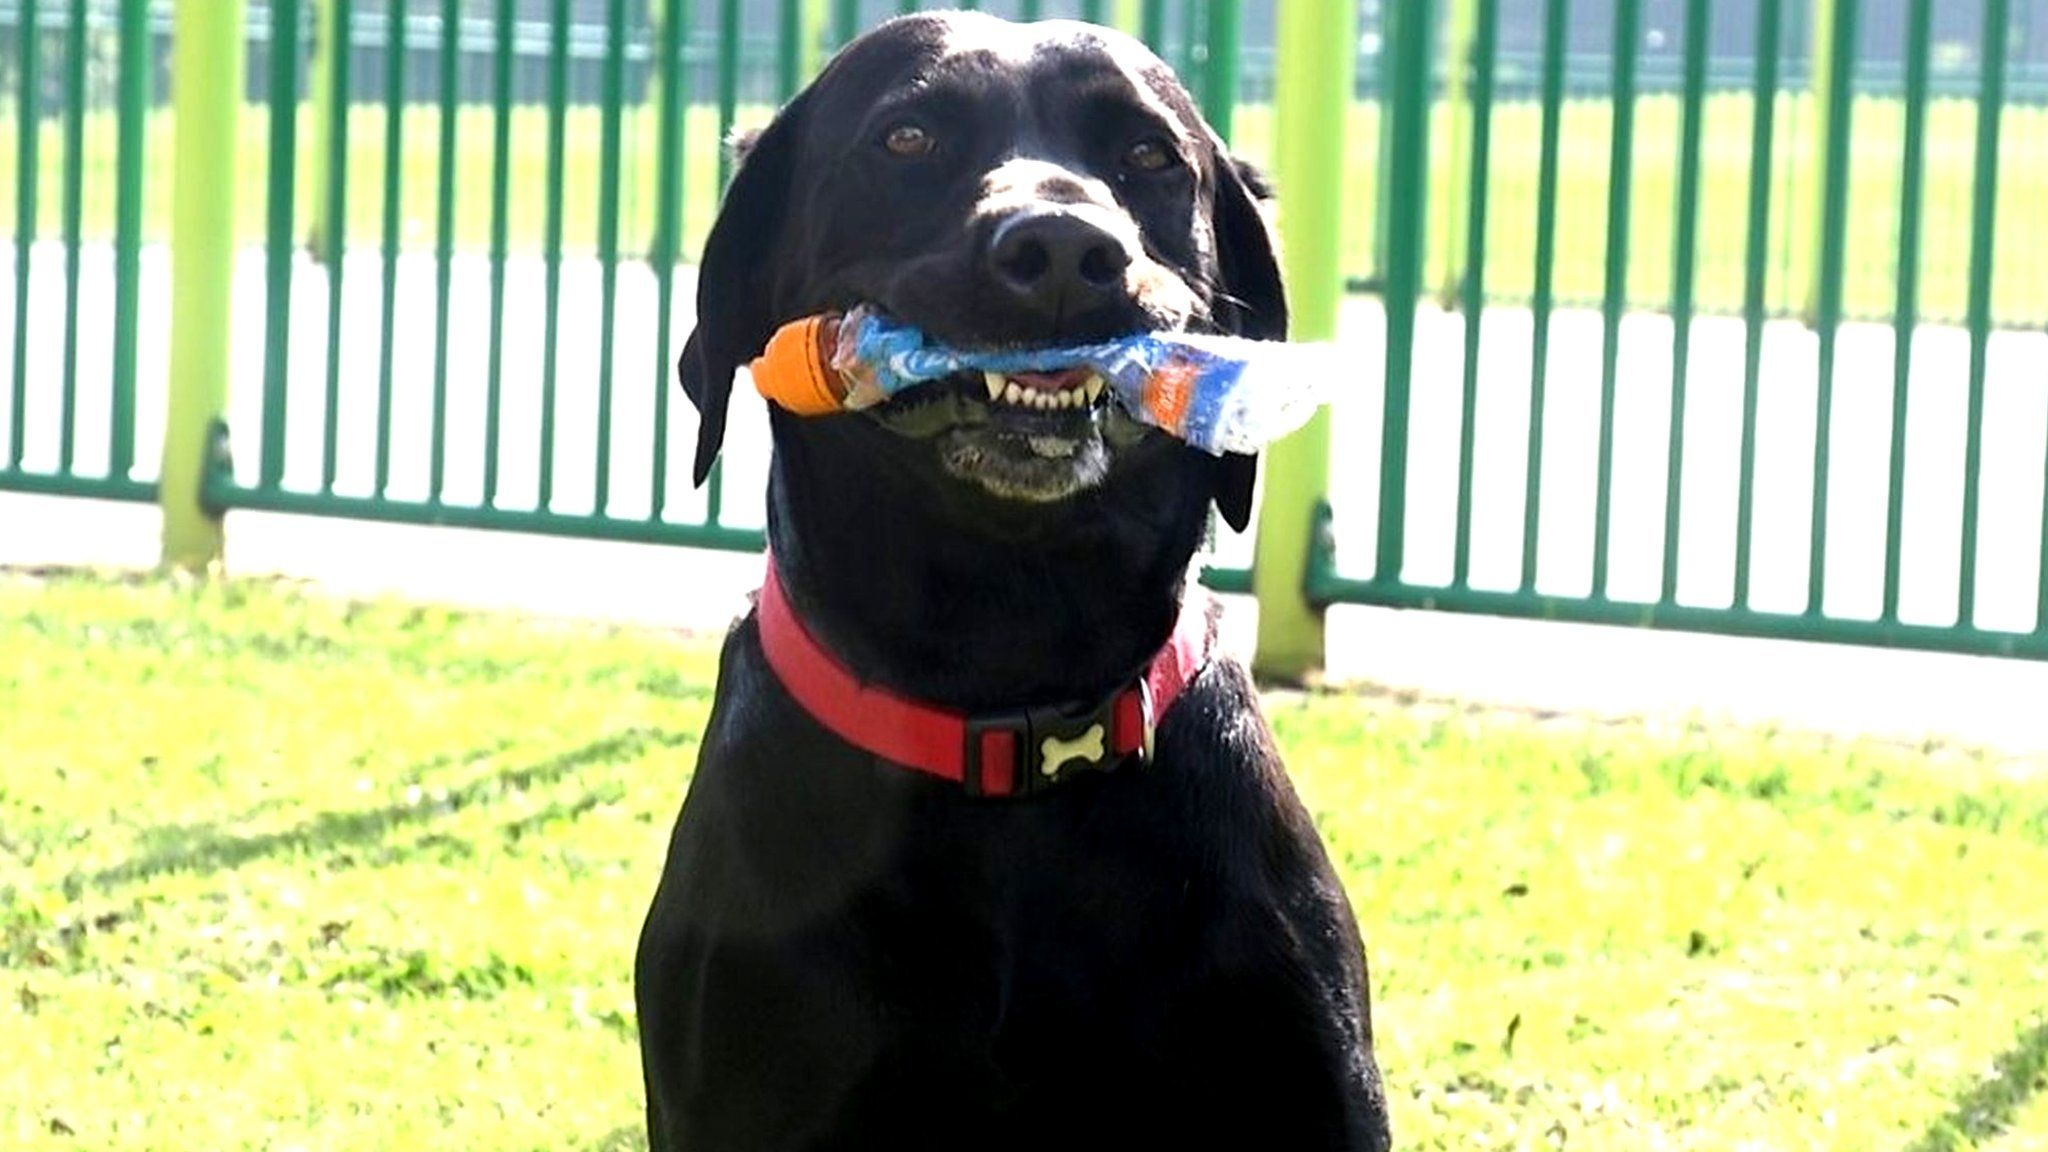 Harley the dog holding a plastic bottle in his mouth